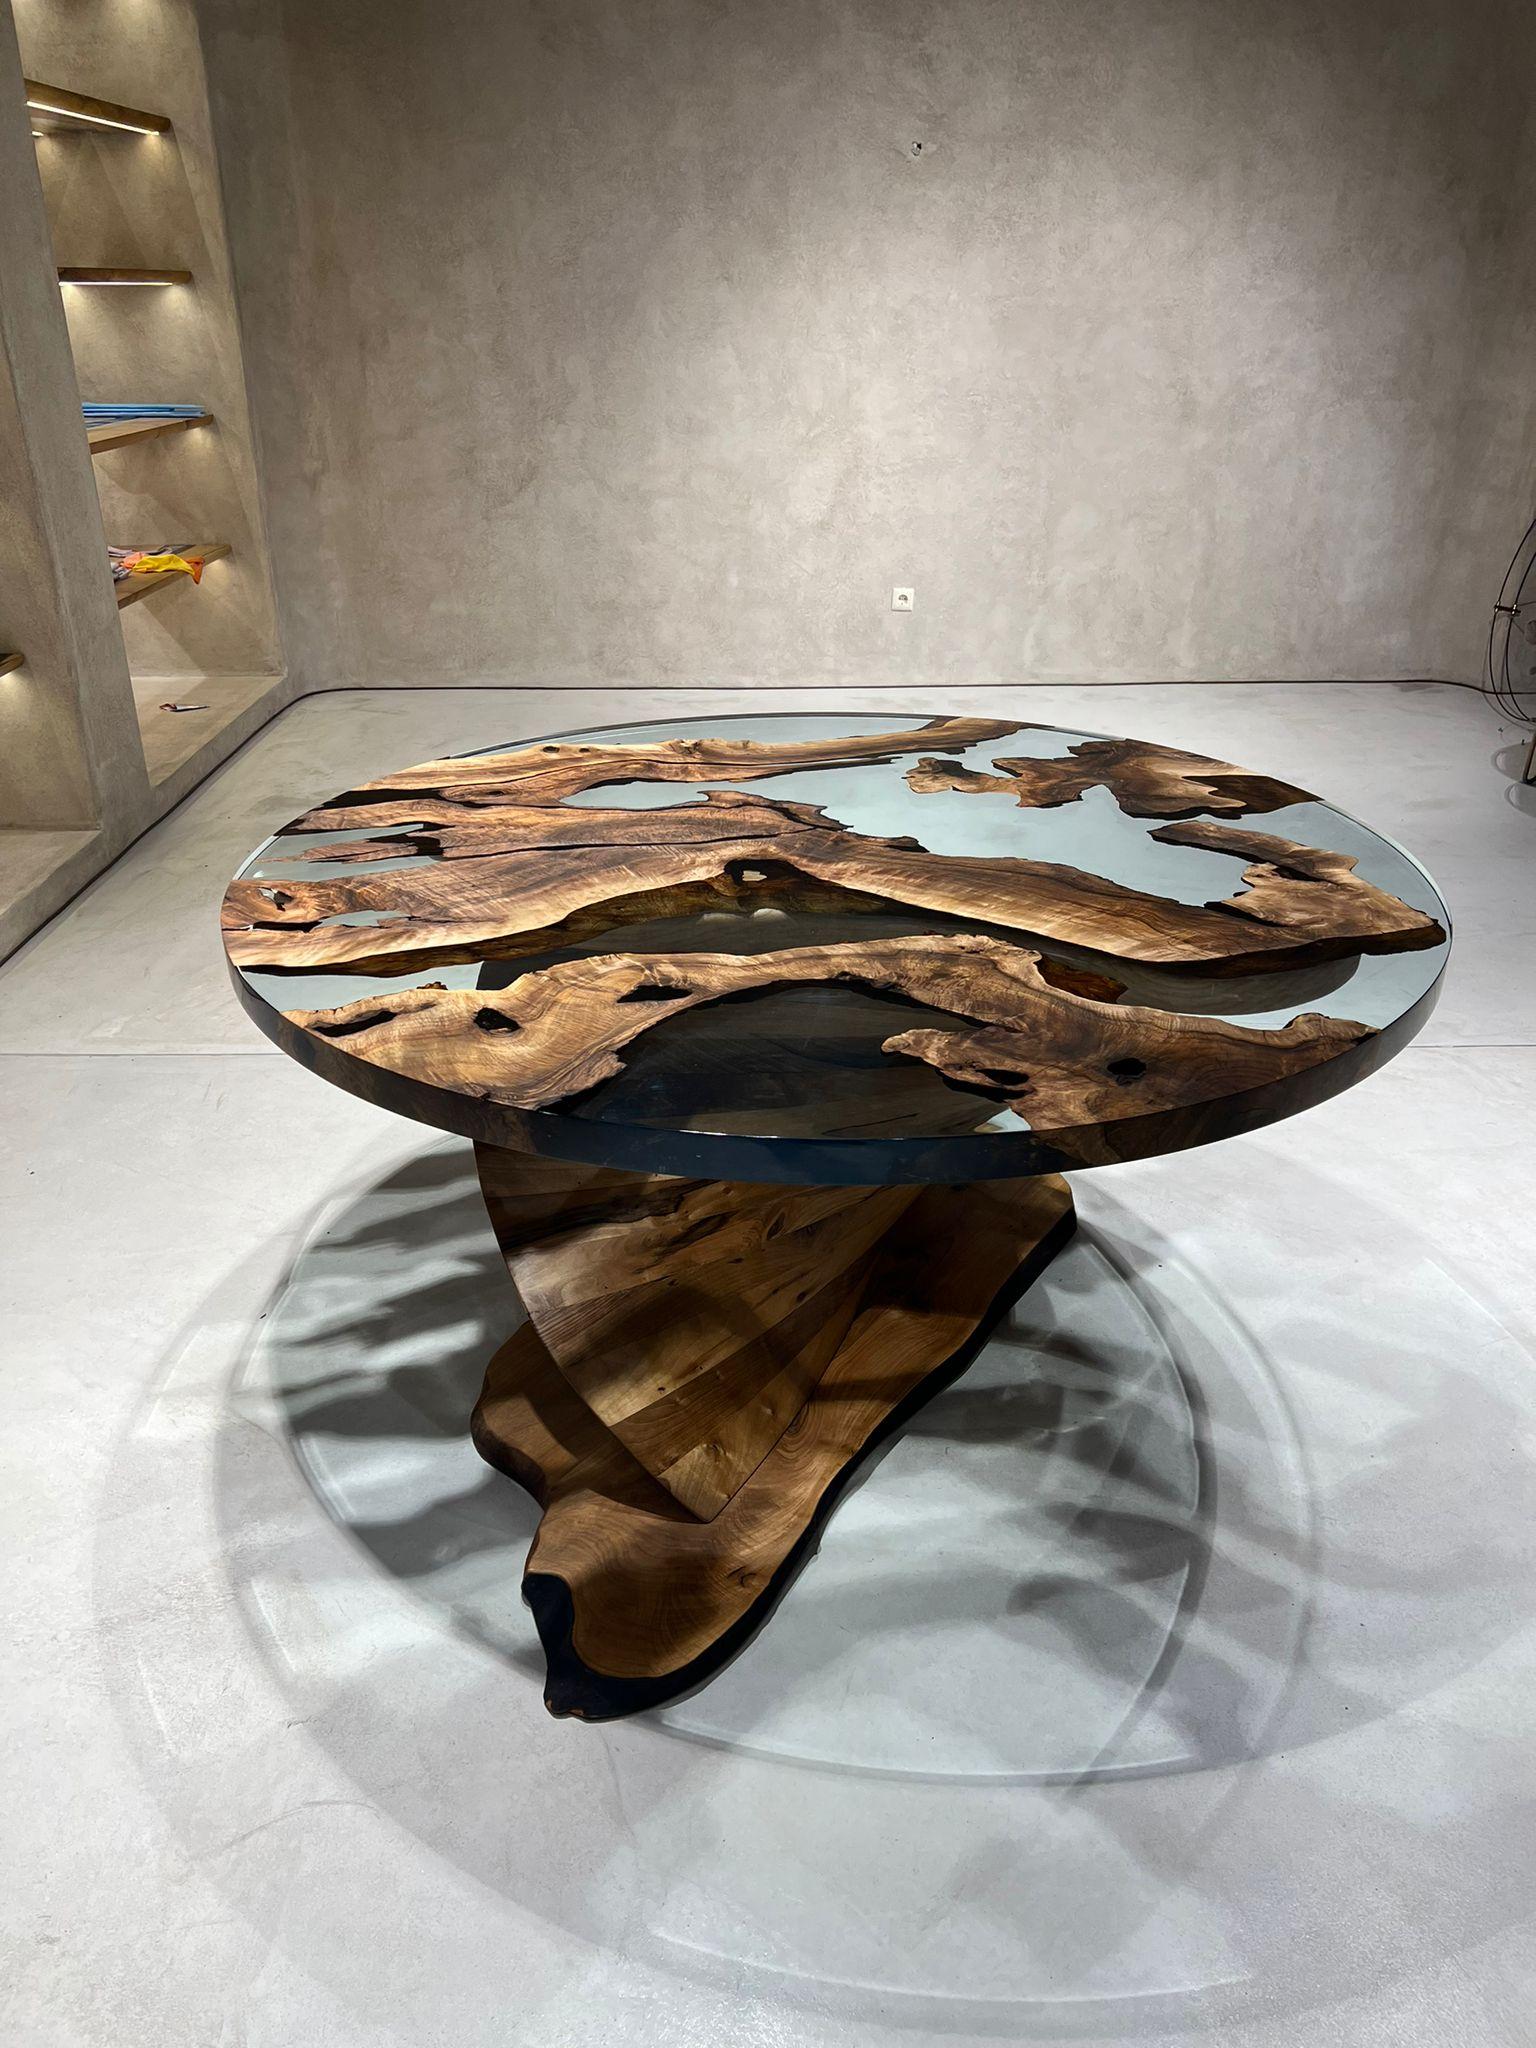 Tywin Round Dining Table: Swirl Walnut Wood, Crystal Clear Resin Epoxy In New Condition For Sale In Miami Beach, FL